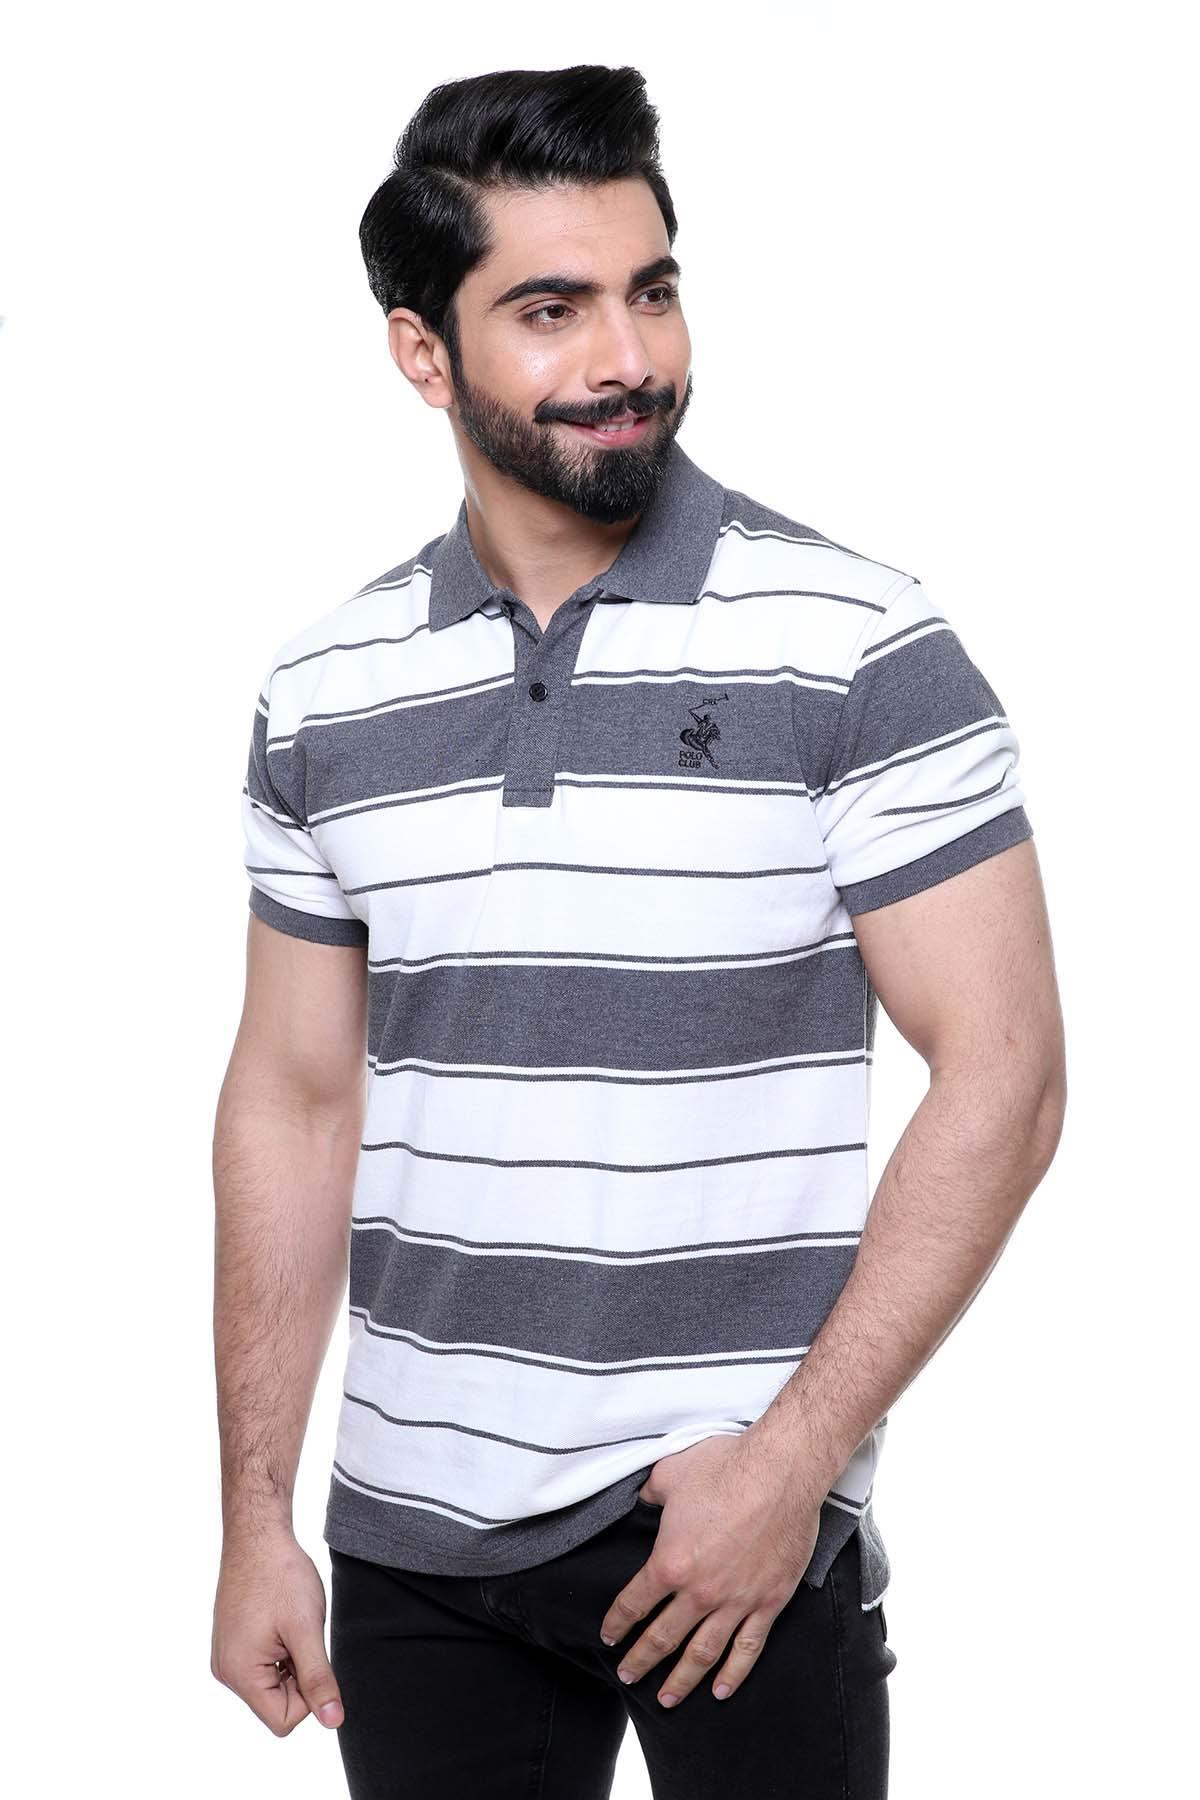 T SHIRT POLO WHITE CHARCOAL at Charcoal Clothing